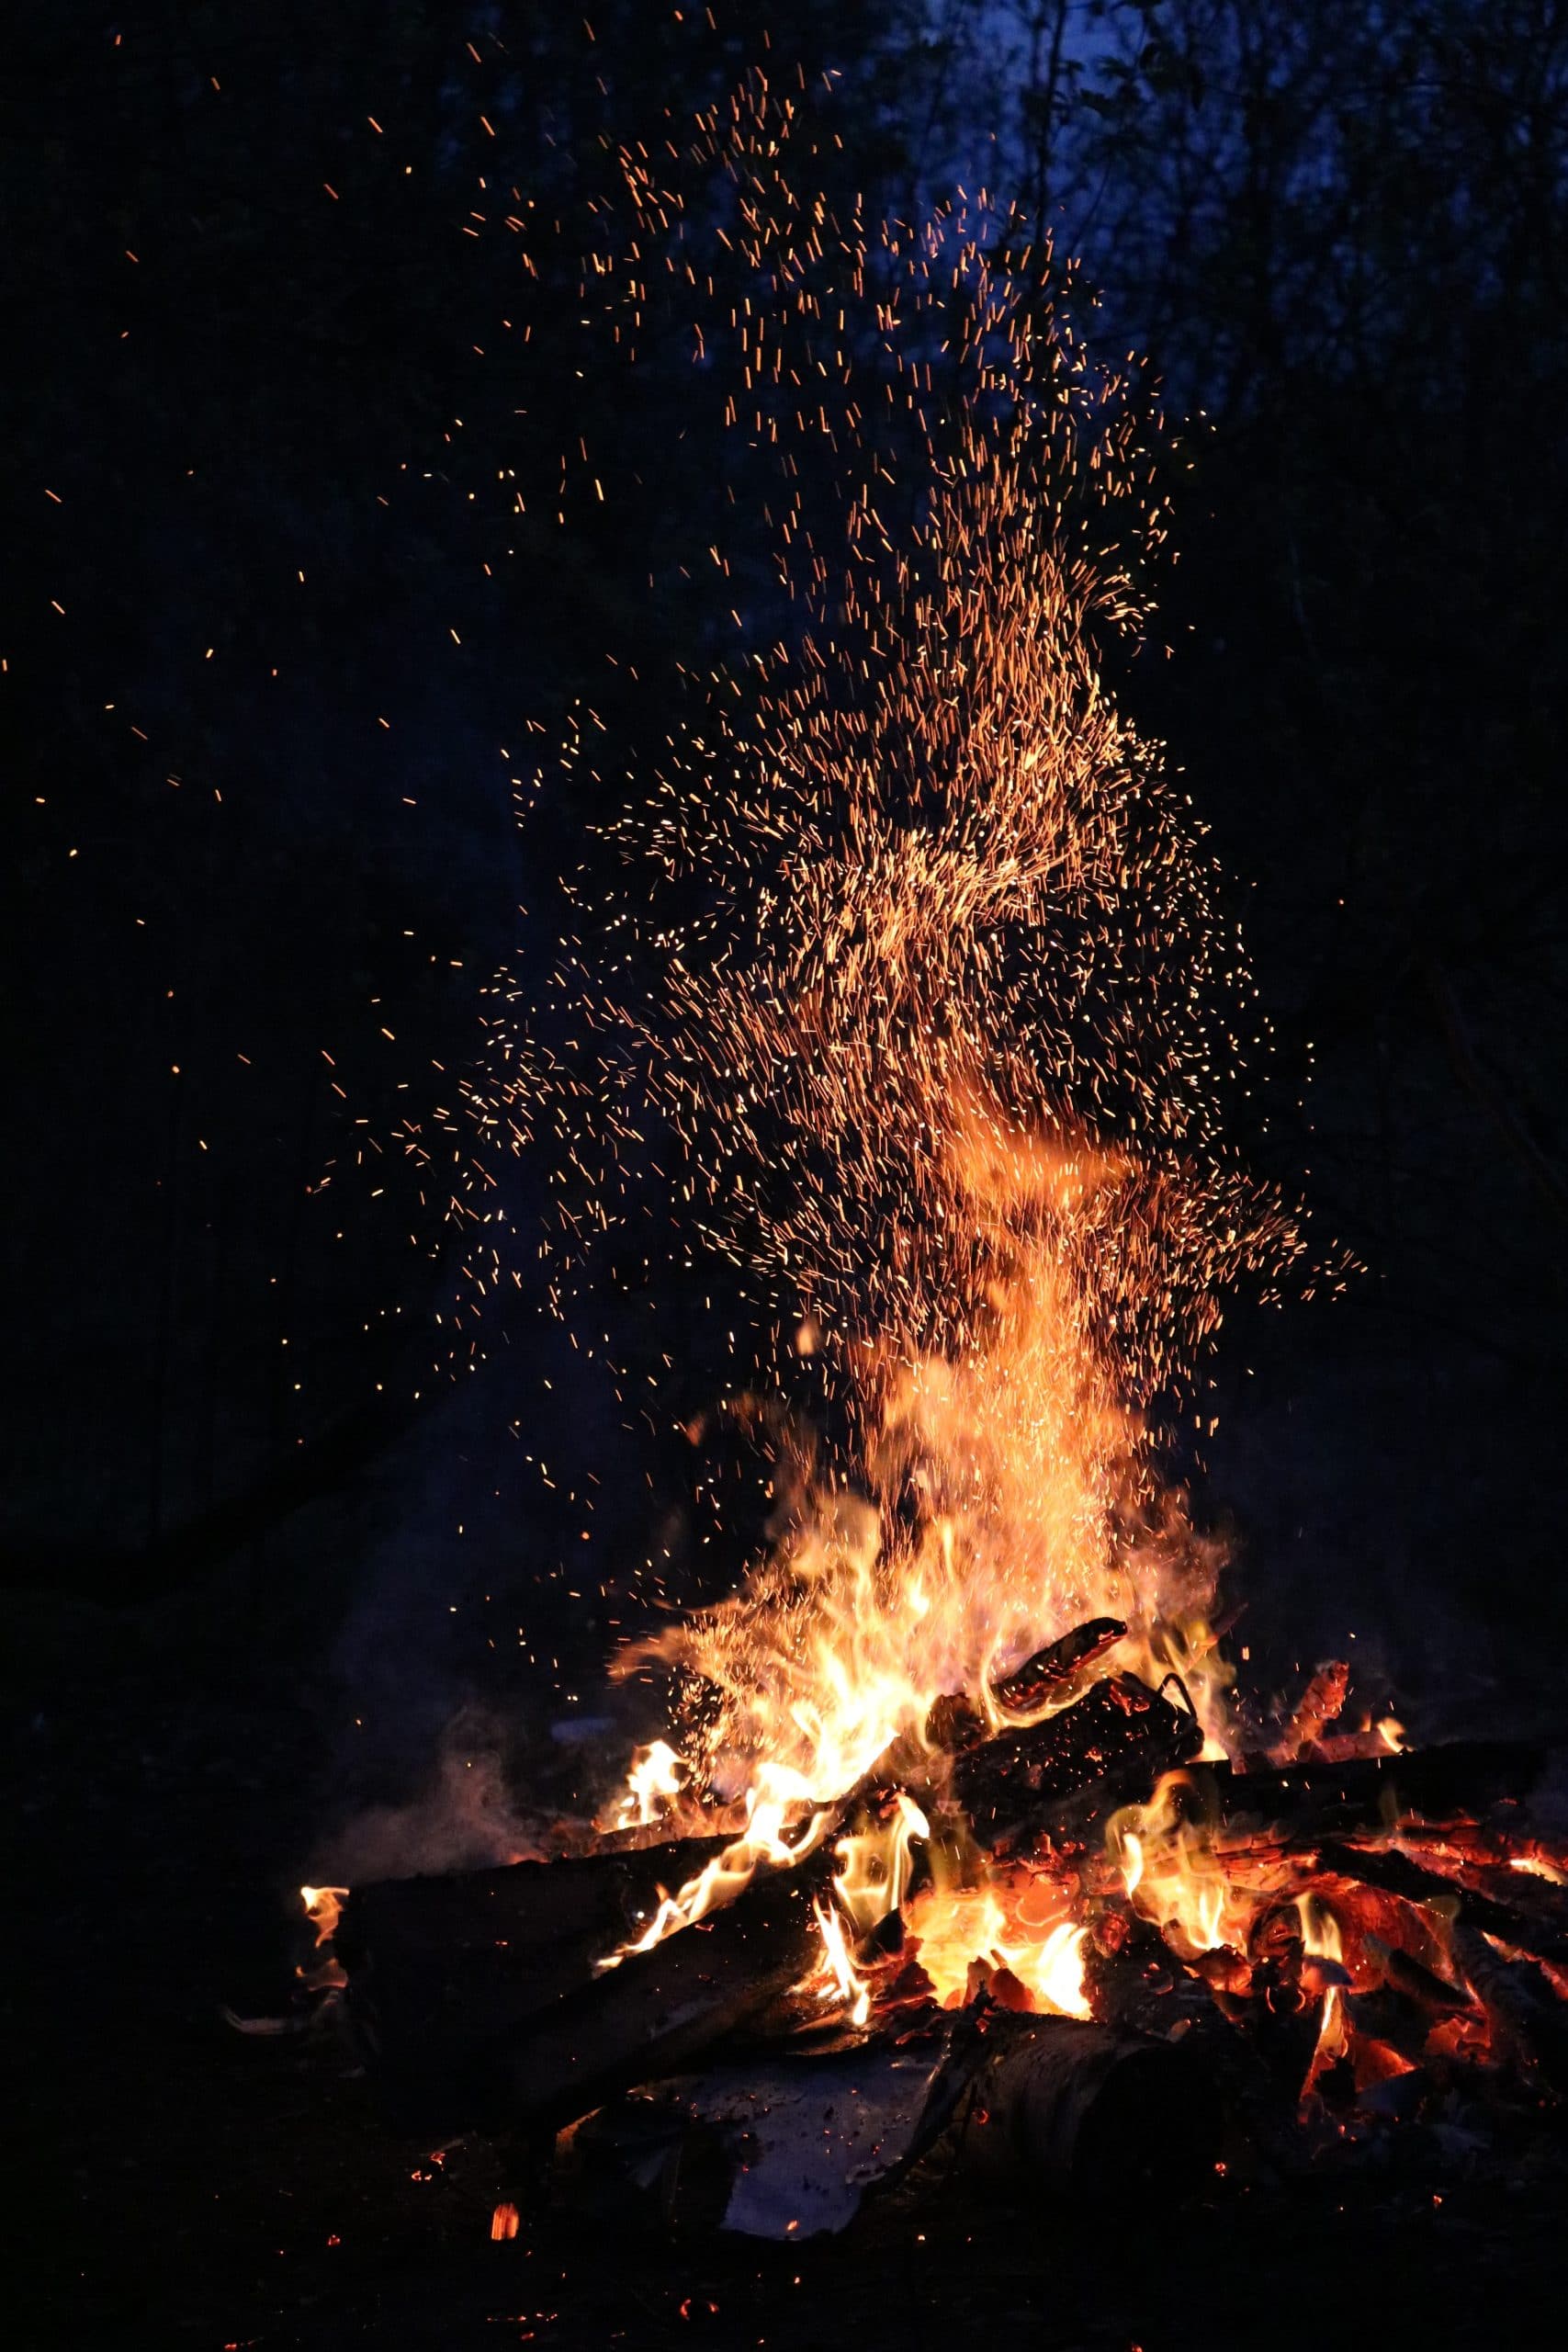 black night sky and a roaring bonfire with tall orange flames